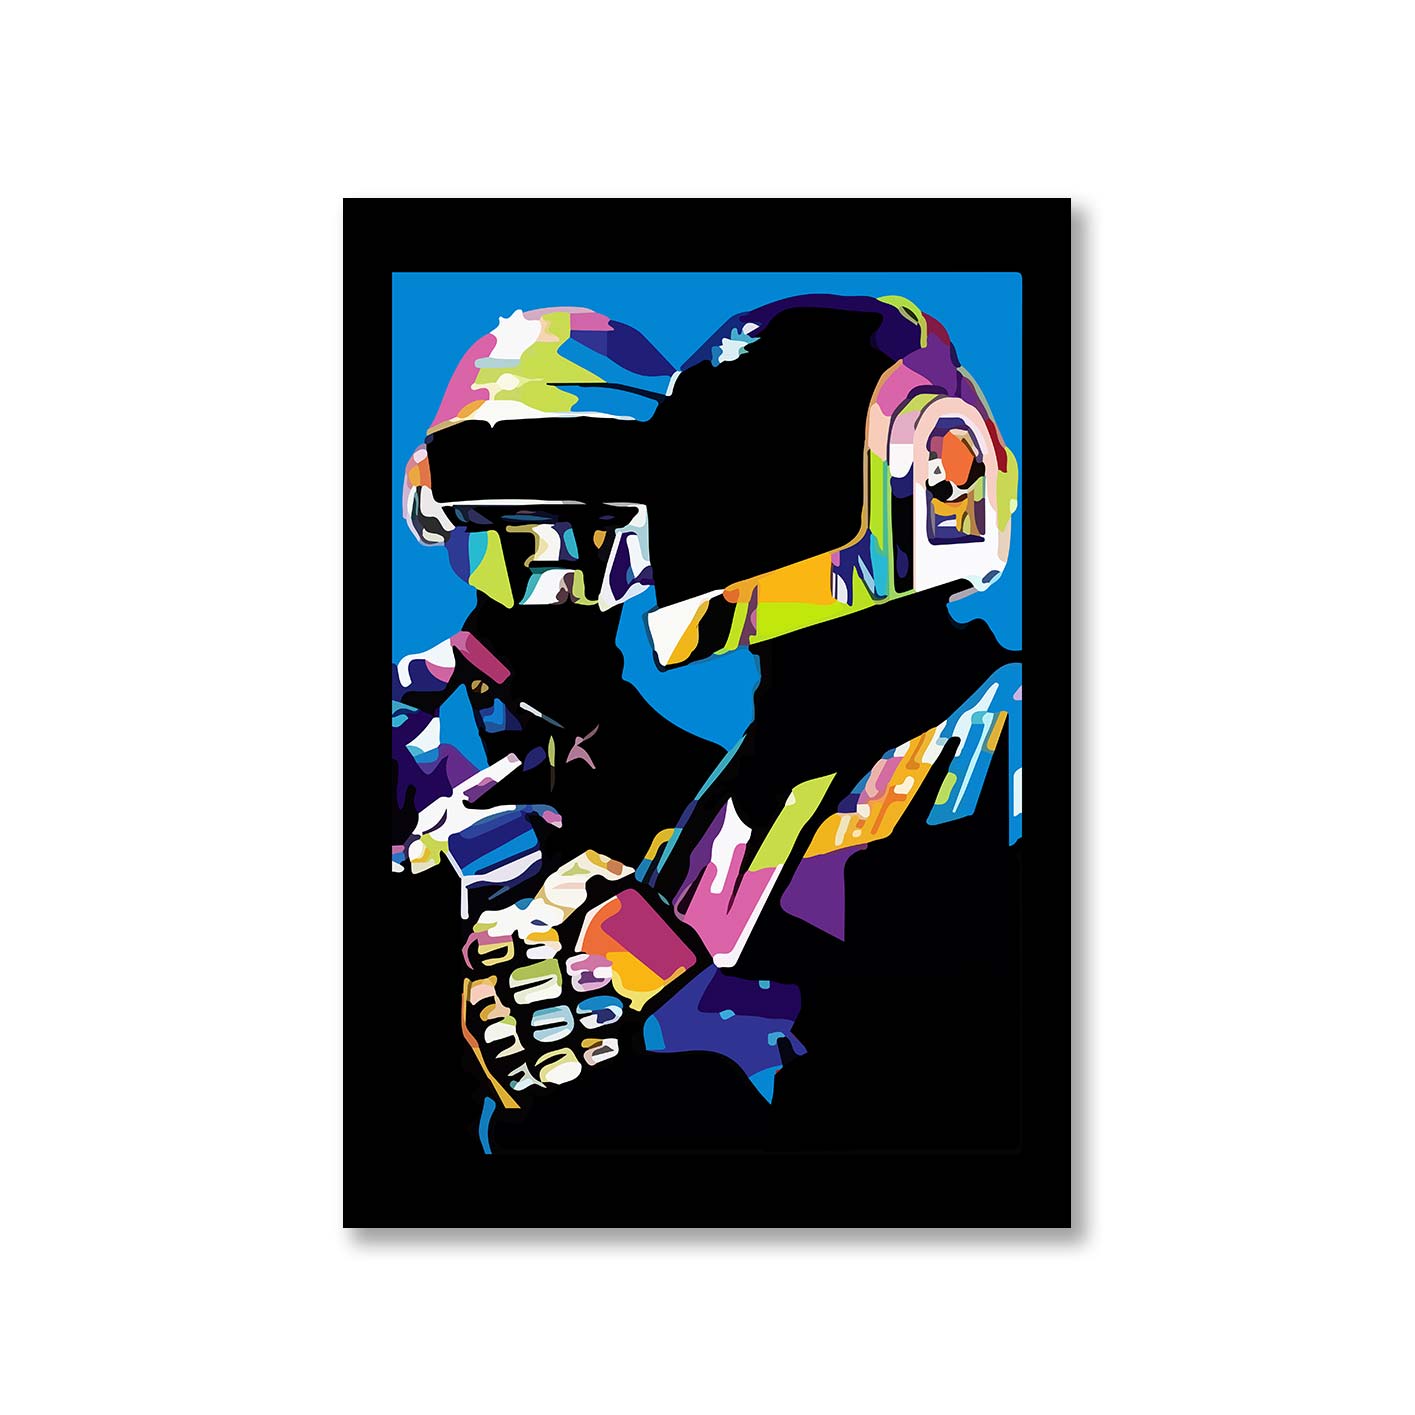 daft punk the duo poster wall art buy online india the banyan tee tbt a4